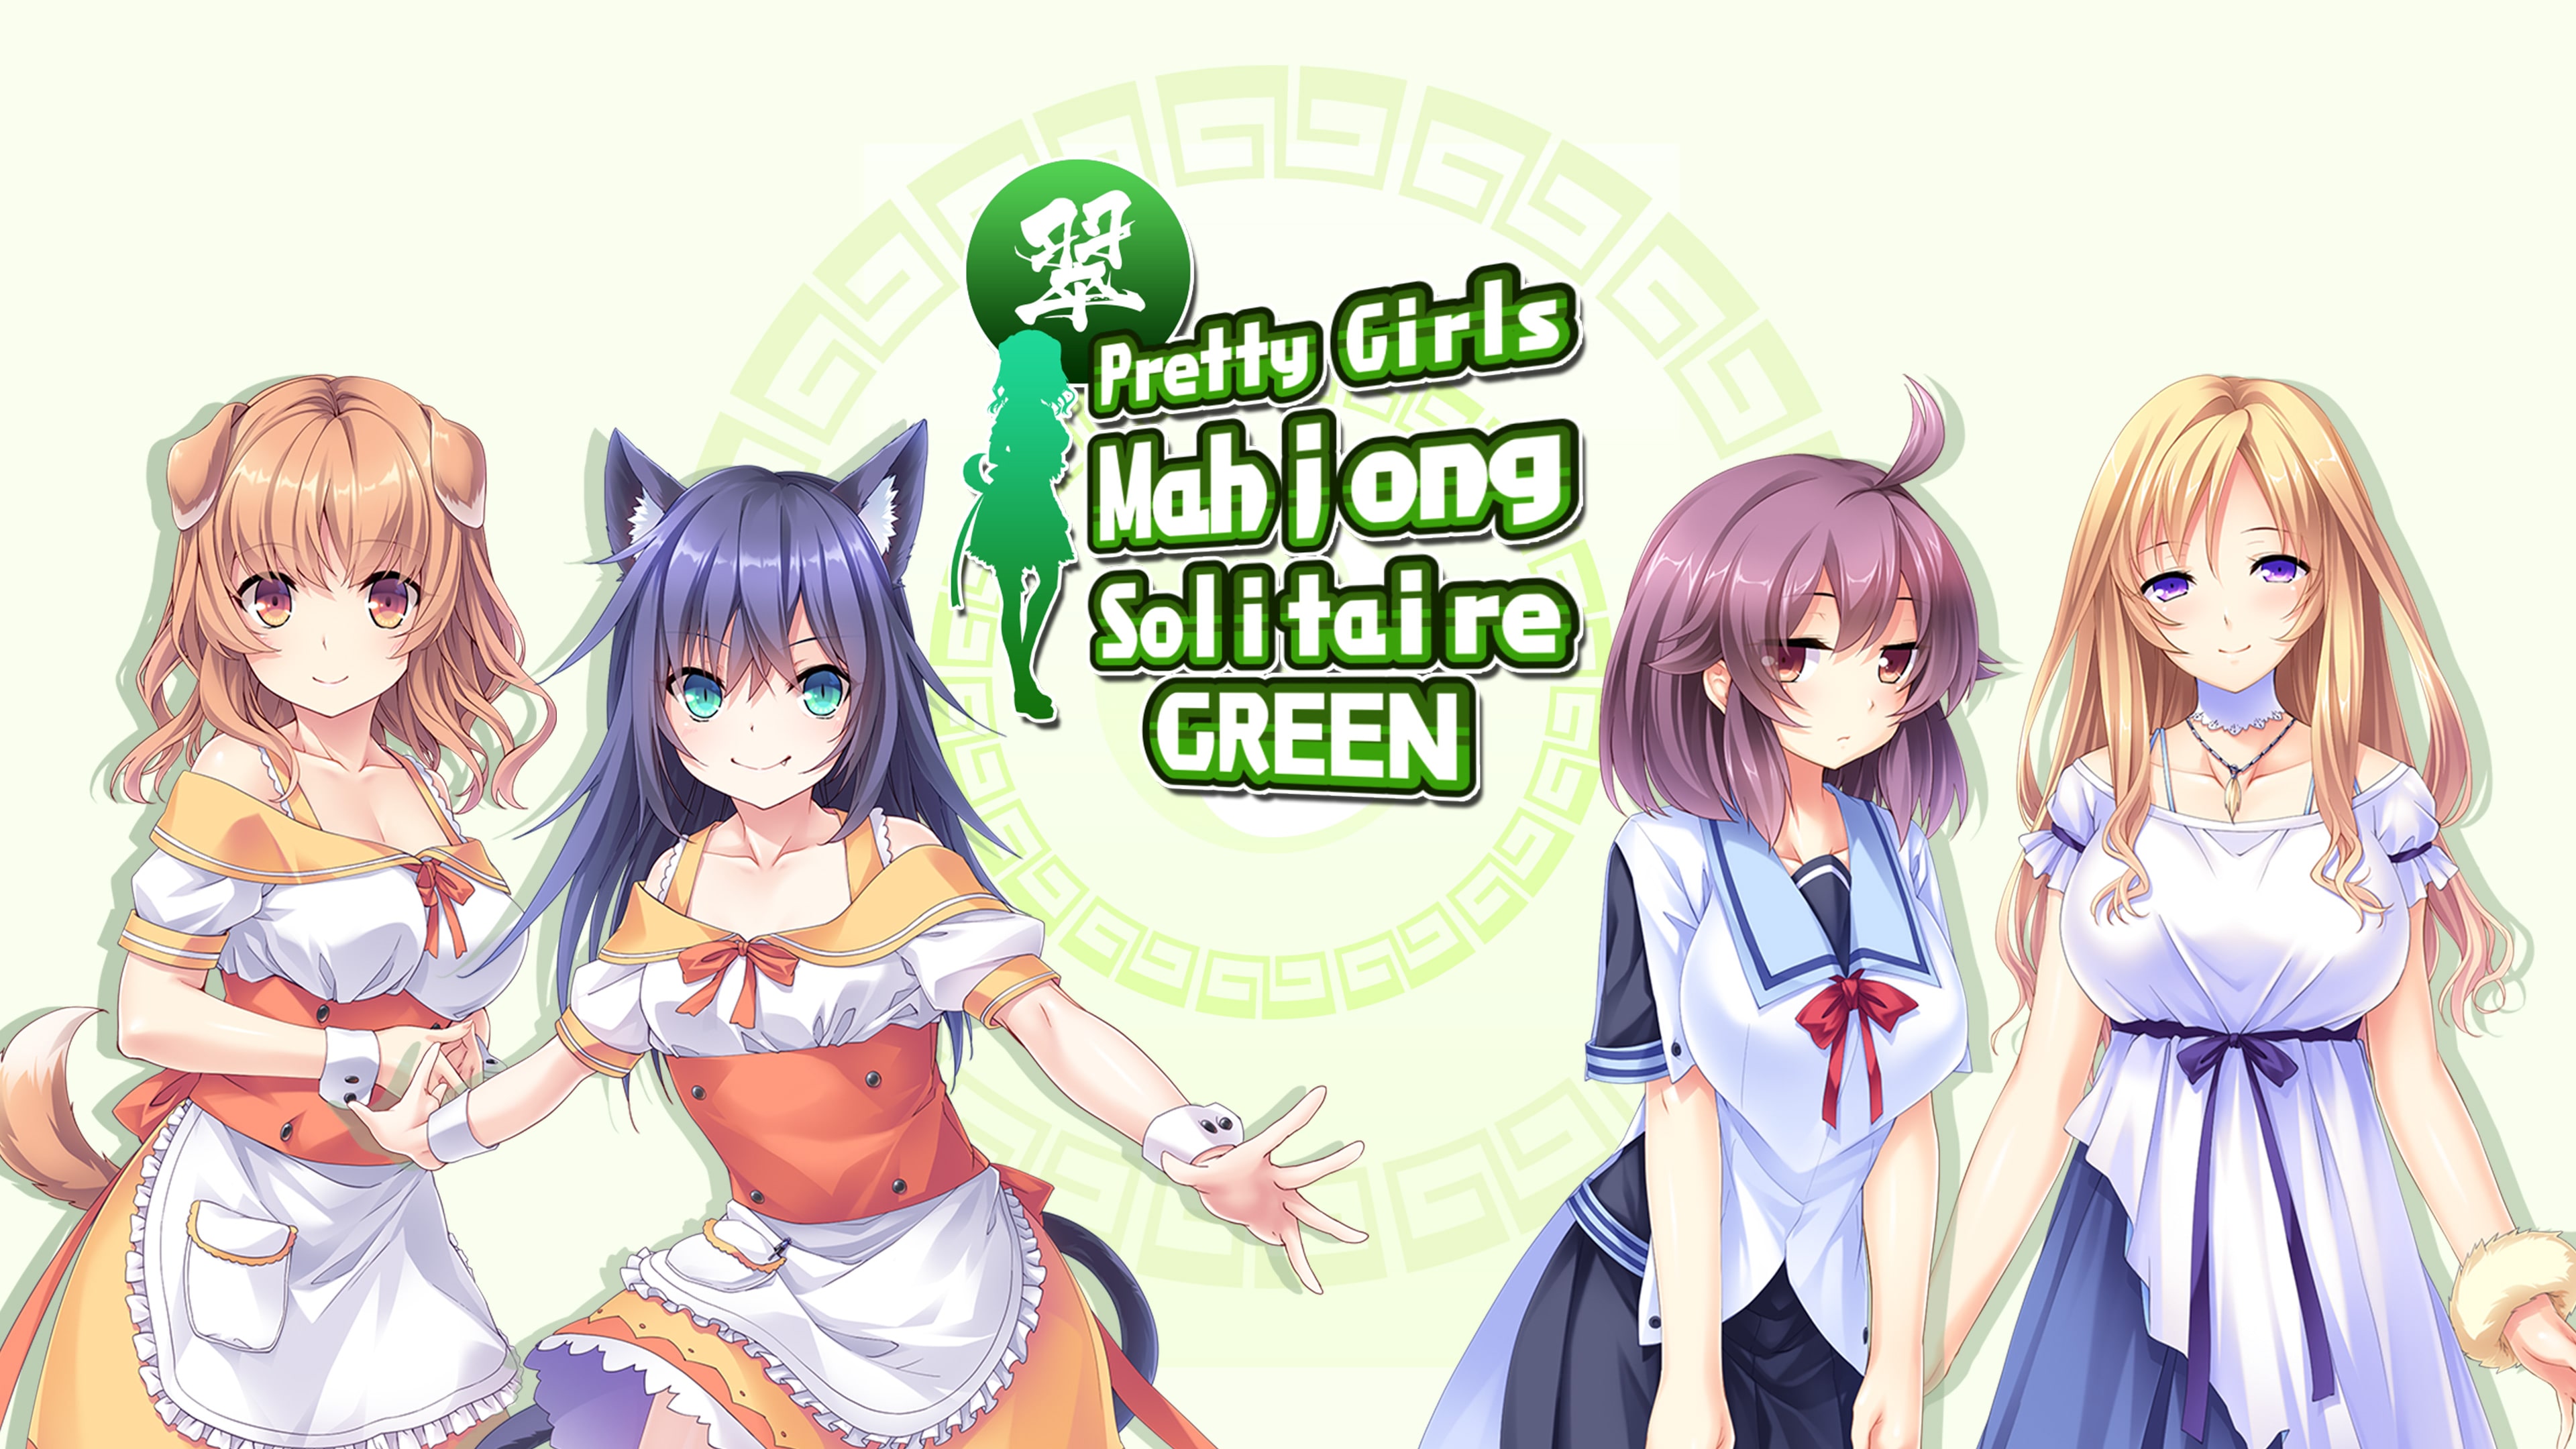 Pretty Girls Mahjong Solitaire - Green PS4 & PS5 (Simplified Chinese, English, Japanese, Traditional Chinese)